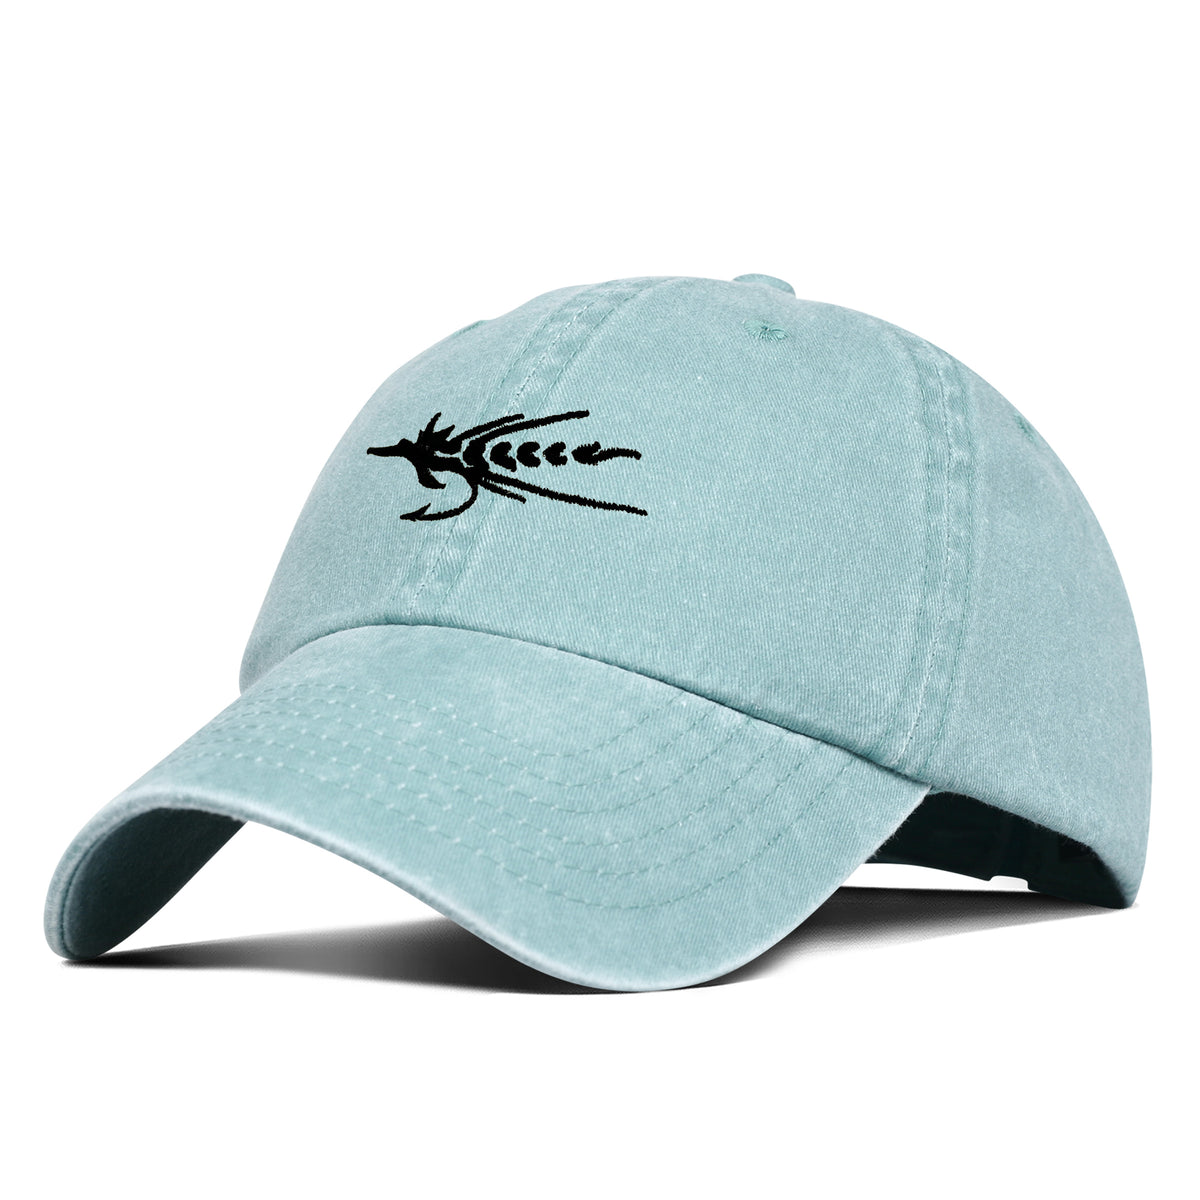 Black Fly Embroidered Hat - Seafoam